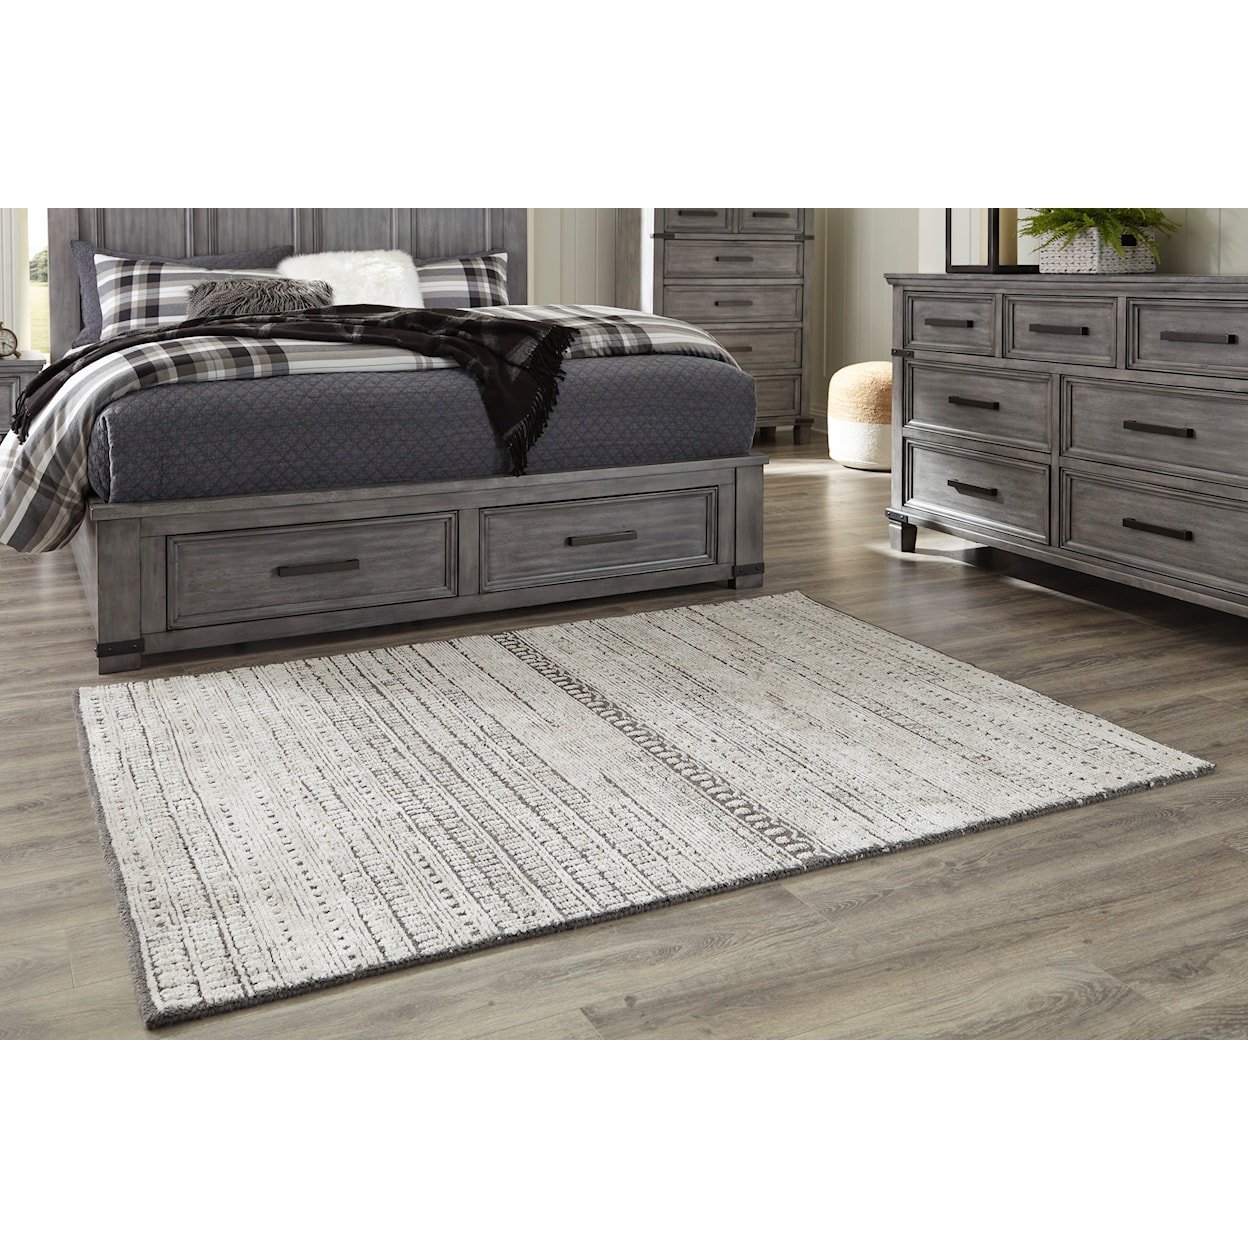 Signature Design by Ashley Contemporary Area Rugs Wimgrove Taupe/Charcoal Medium Rug